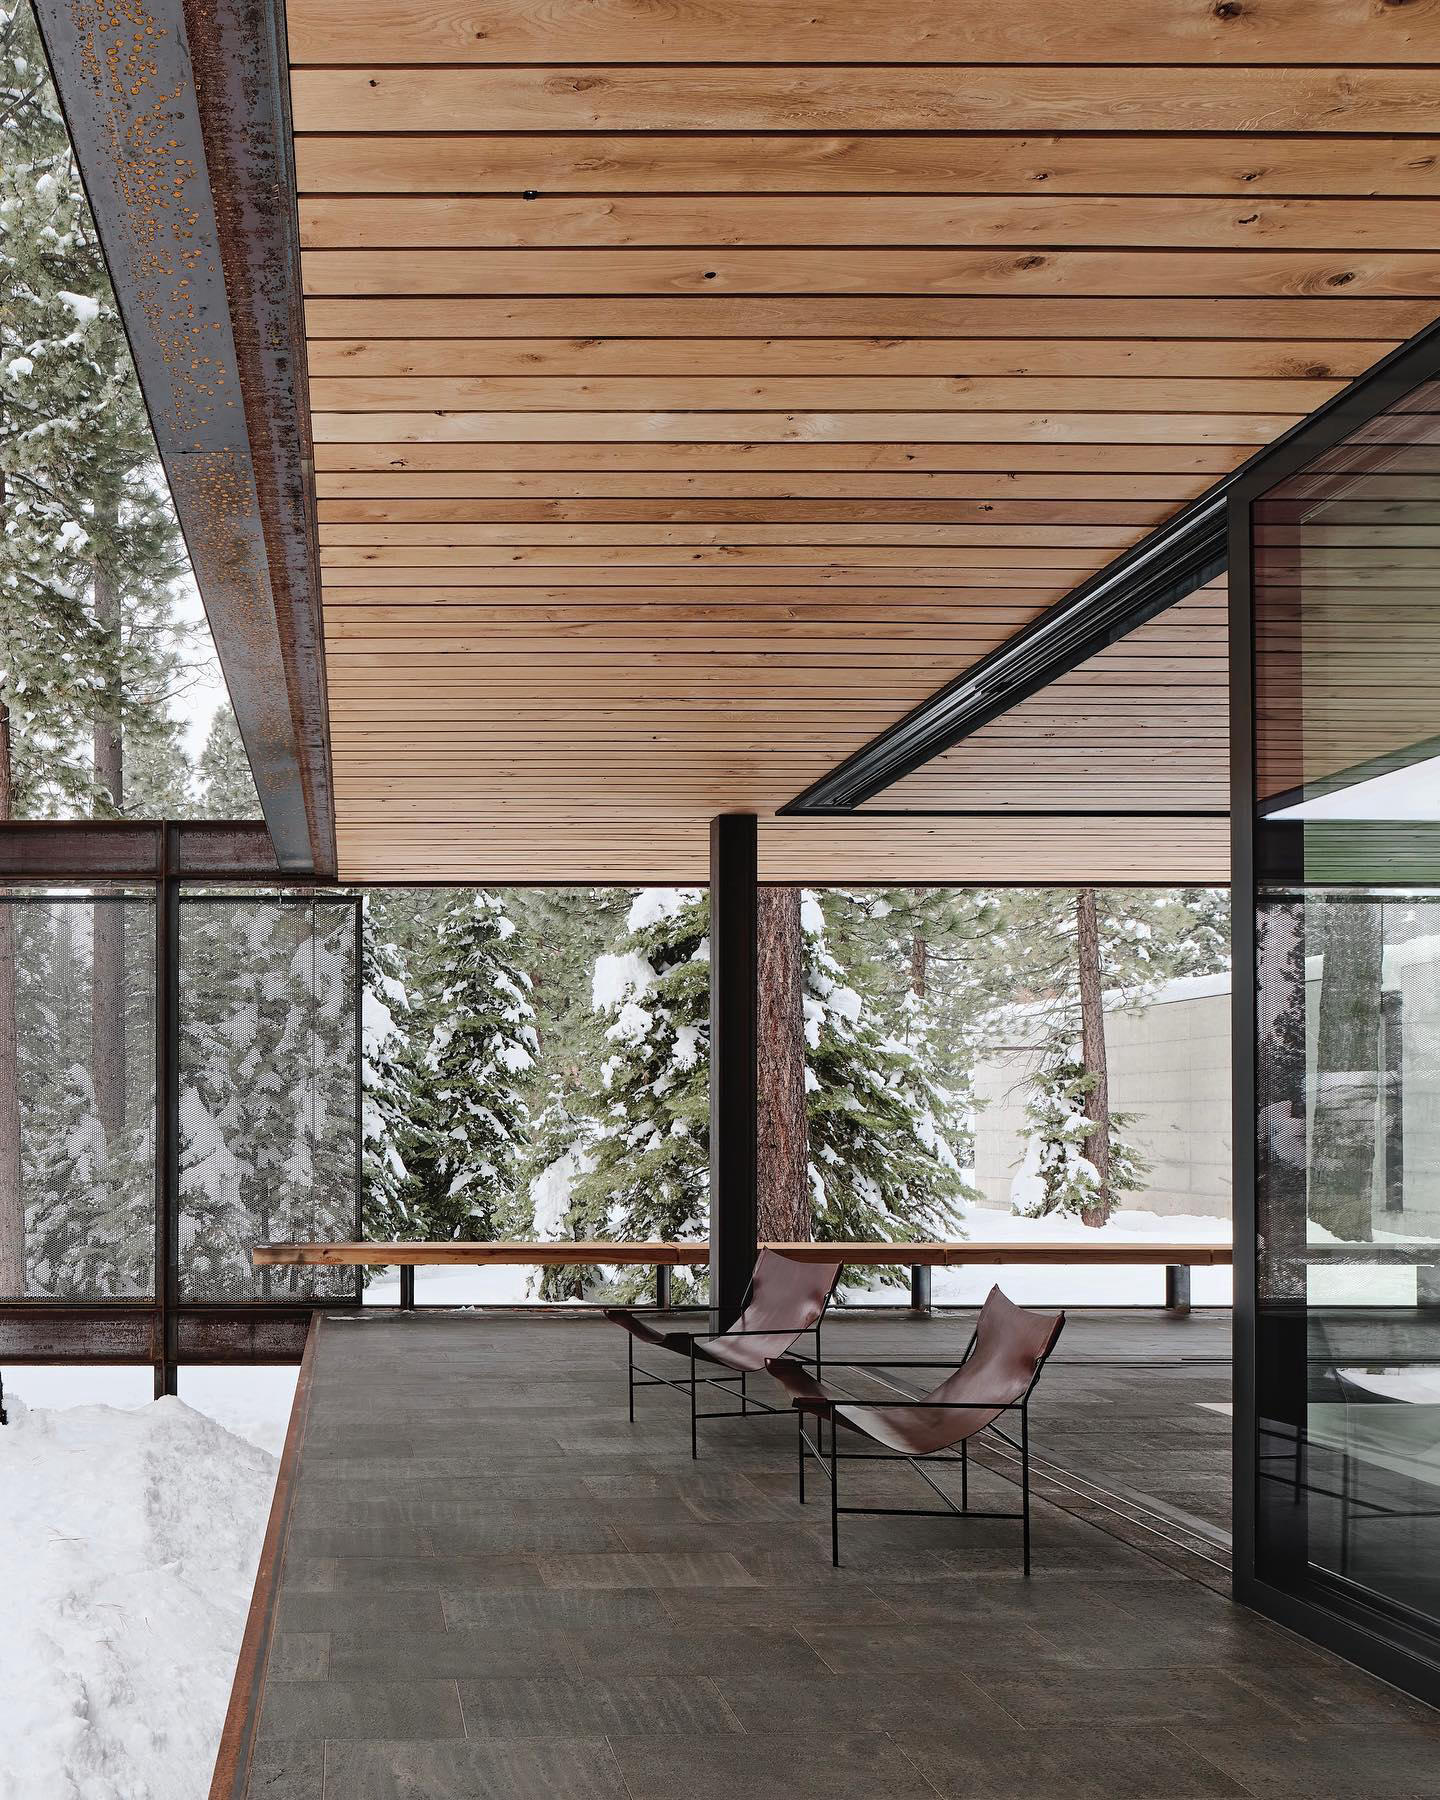 image  1 designboom magazine - #olsonkundig takes to truckee, #california with its ‘analog house’ — completed